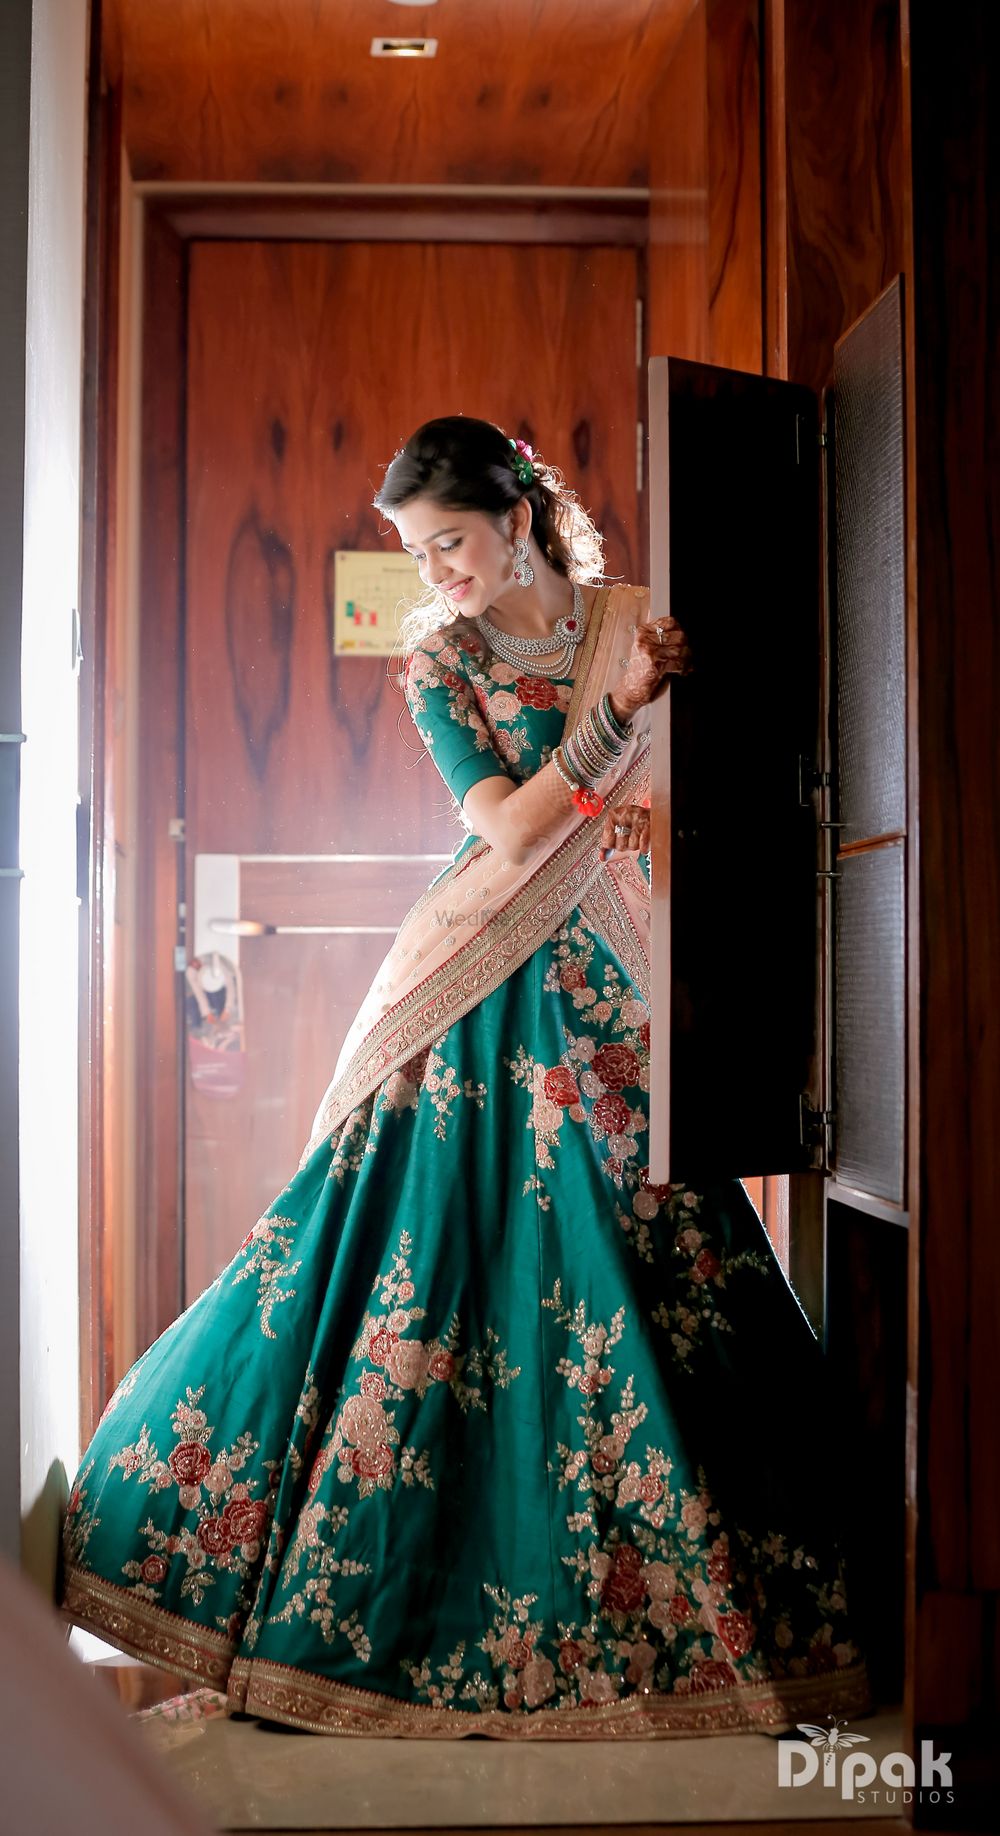 Photo of Bride in Teal Floral  Lehenga for Sangeet